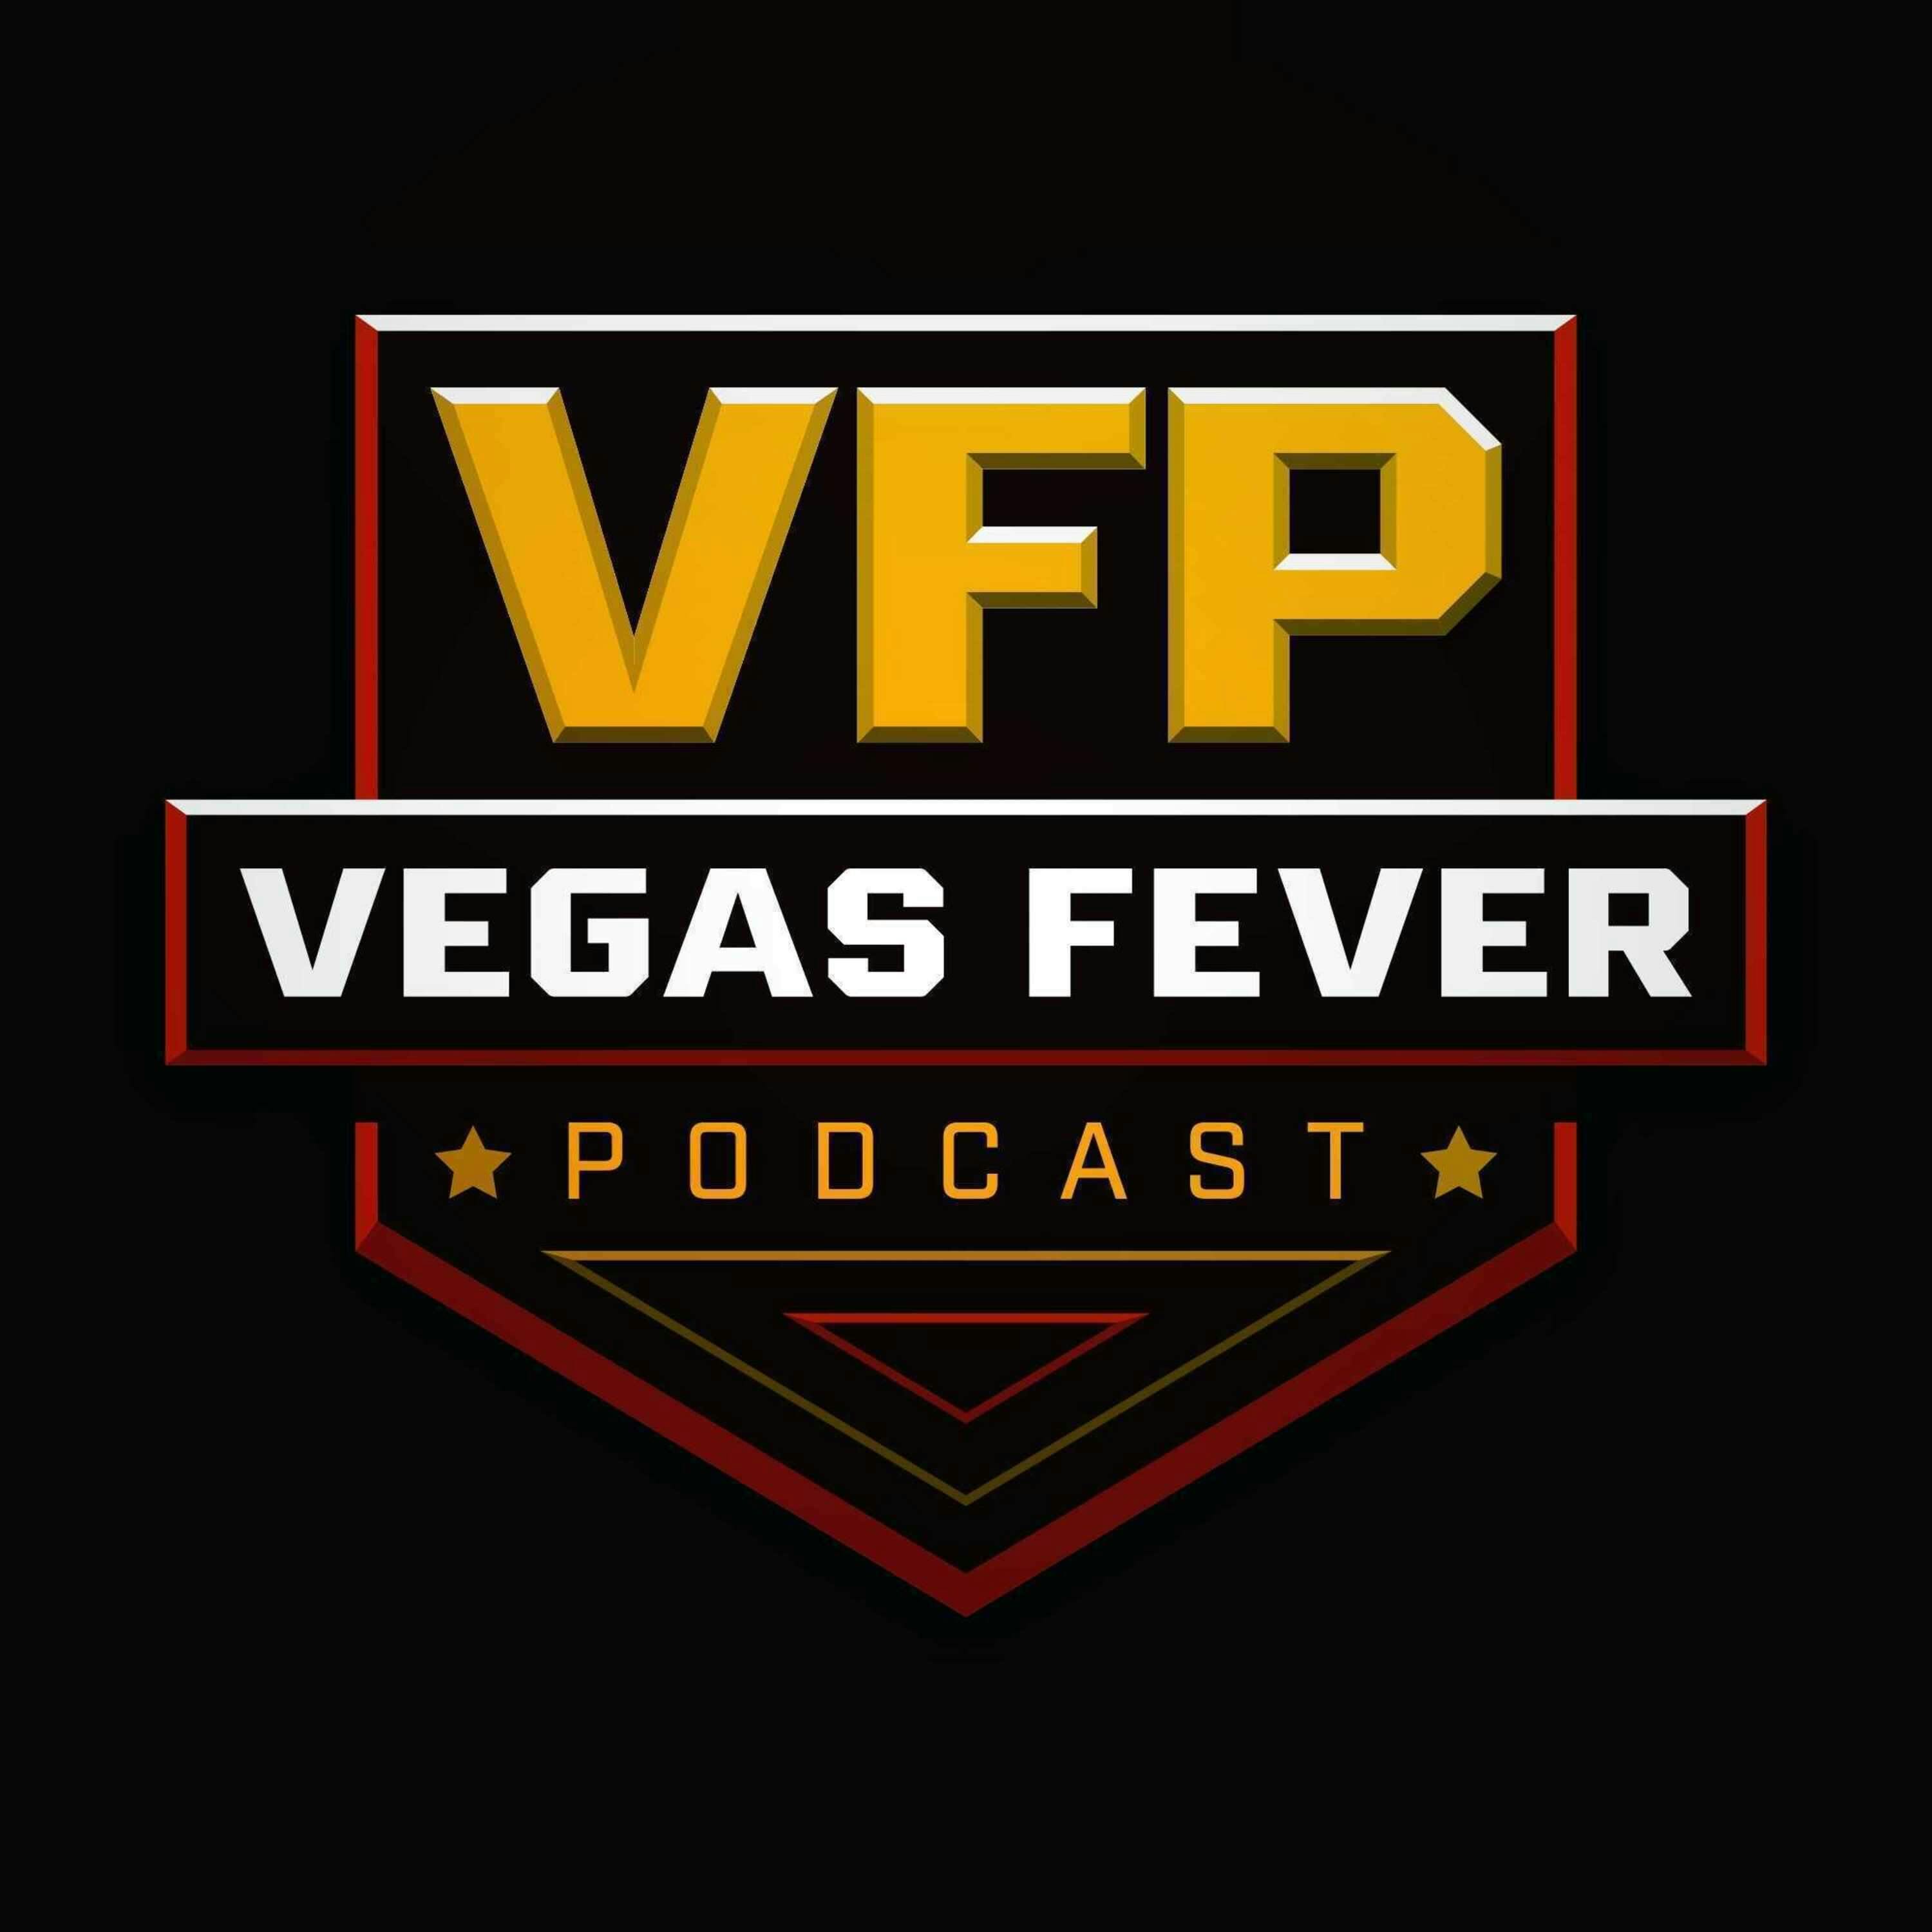 We discuss the VGK and UNLV seasons so far, while throwing in a MLS and Las Vegas A’s update. also.